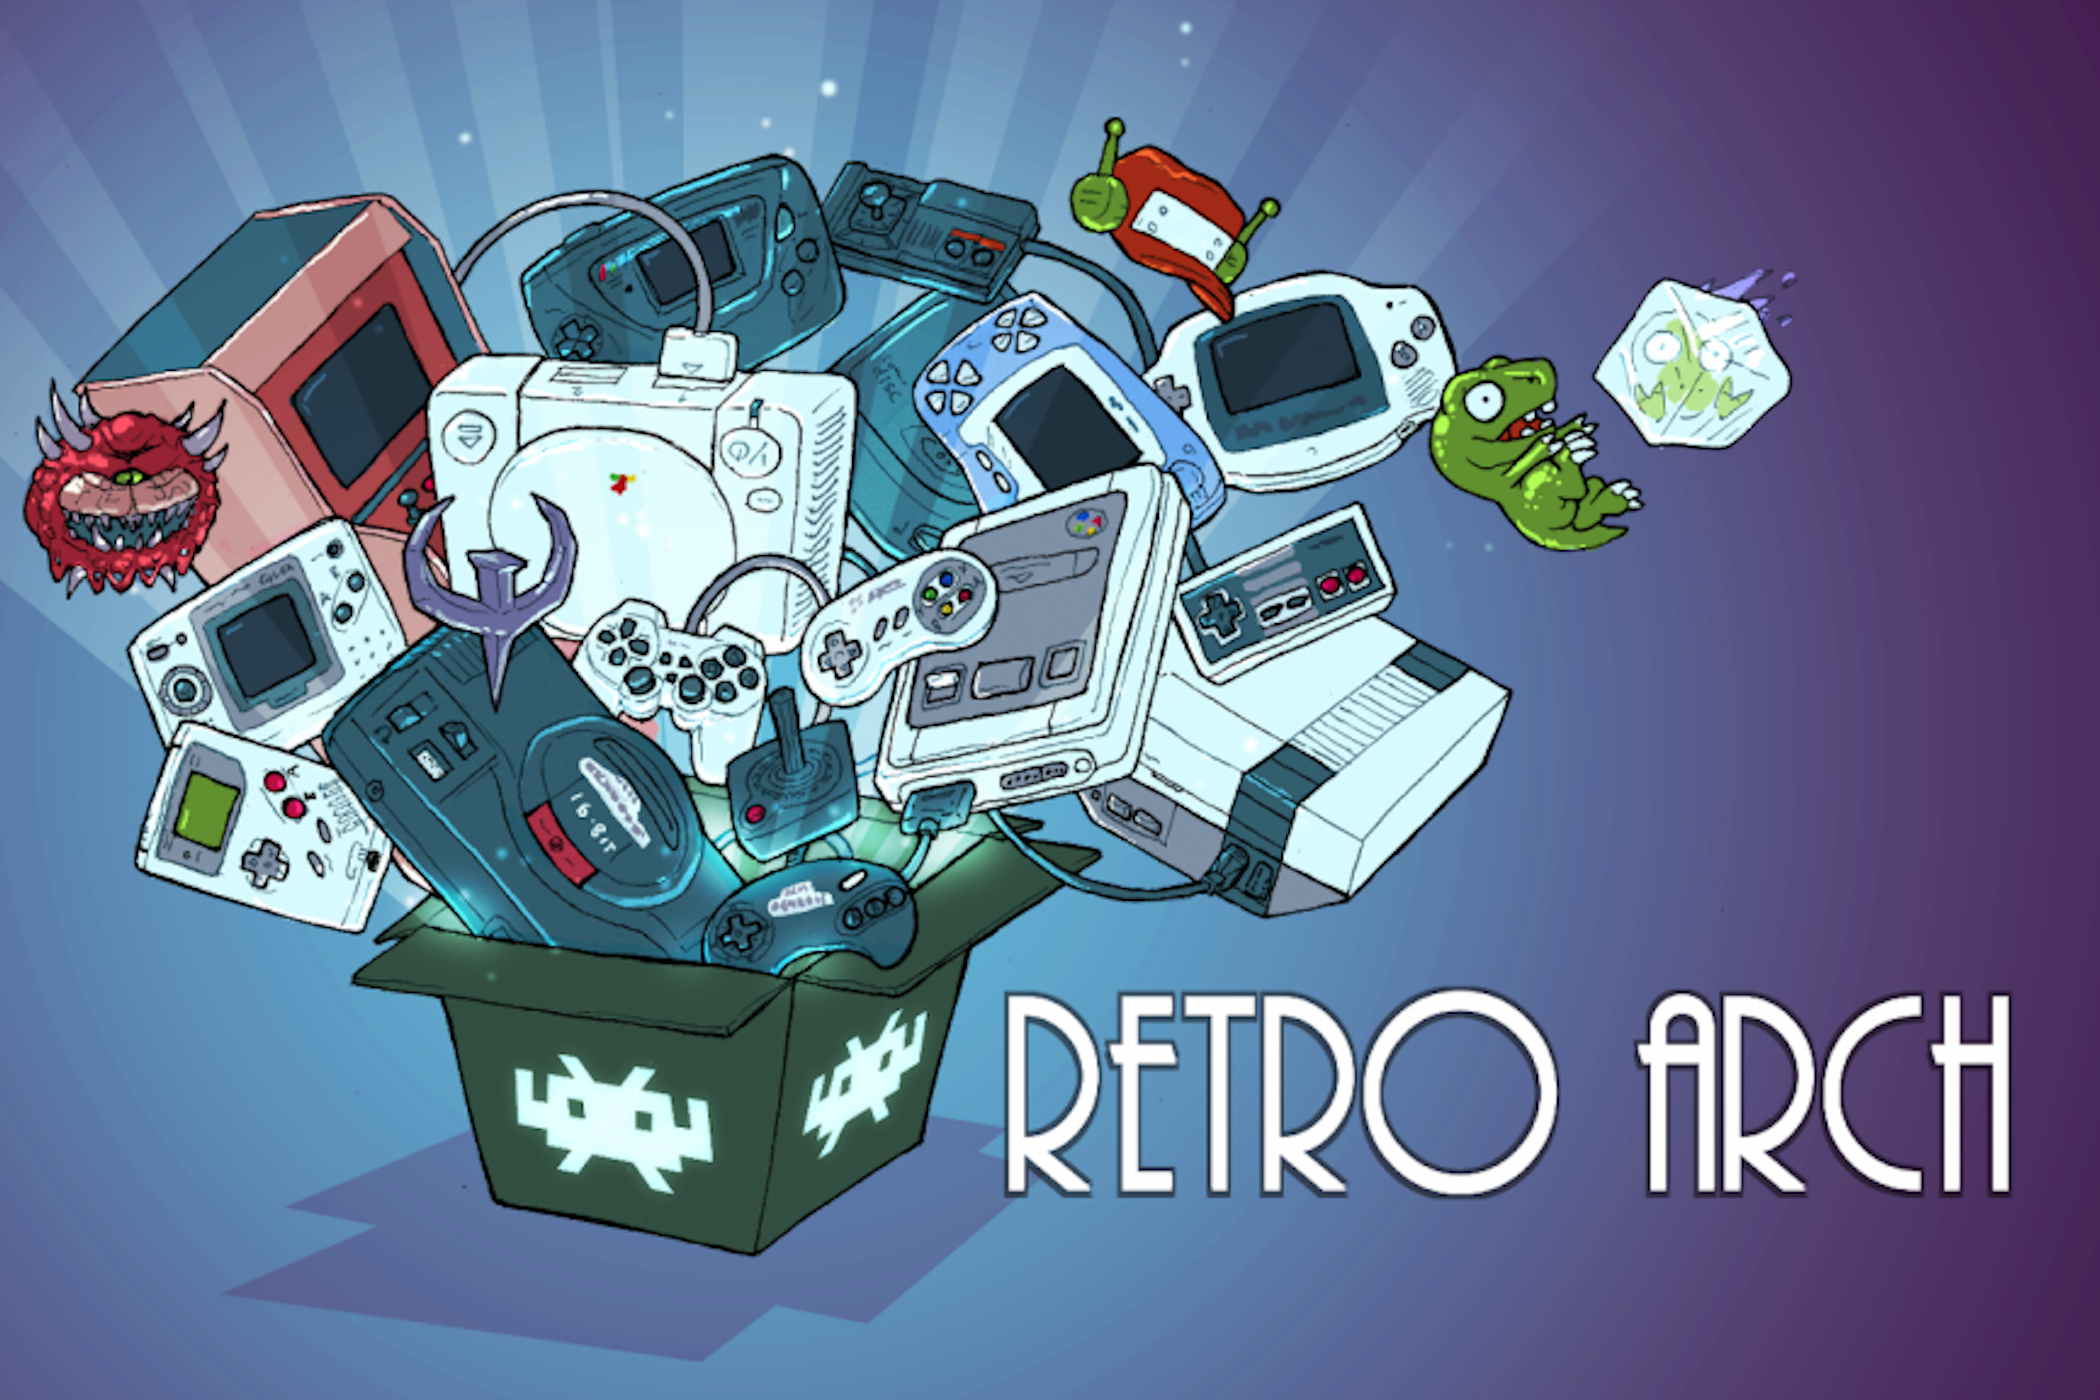 The powerful RetroArch is iOS's newest emulator on the App Store